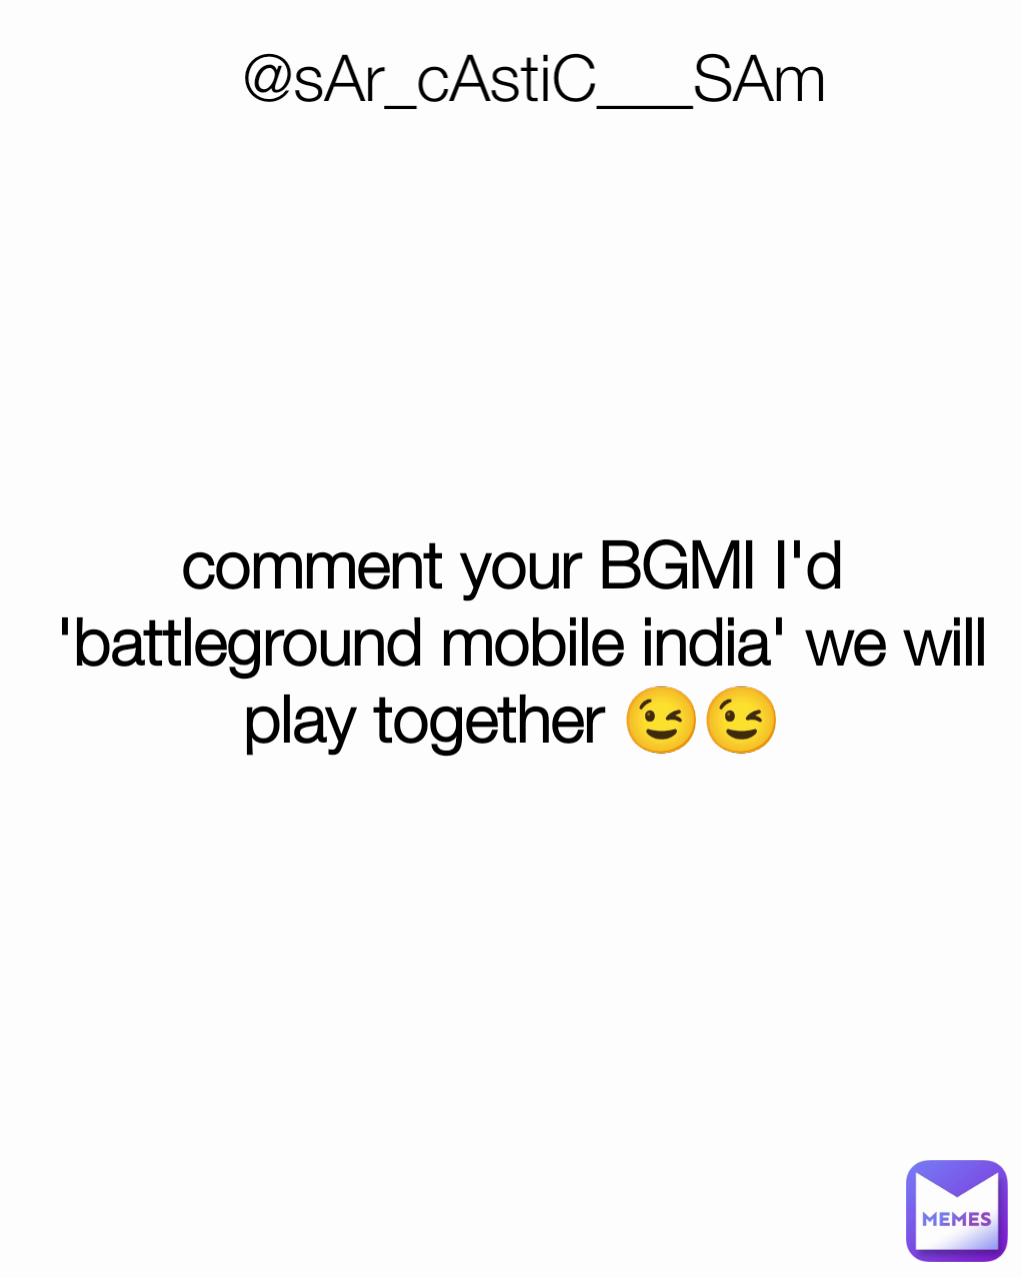 @sAr_cAstiC___SAm comment your BGMI I'd
 'battleground mobile india' we will play together 😉😉